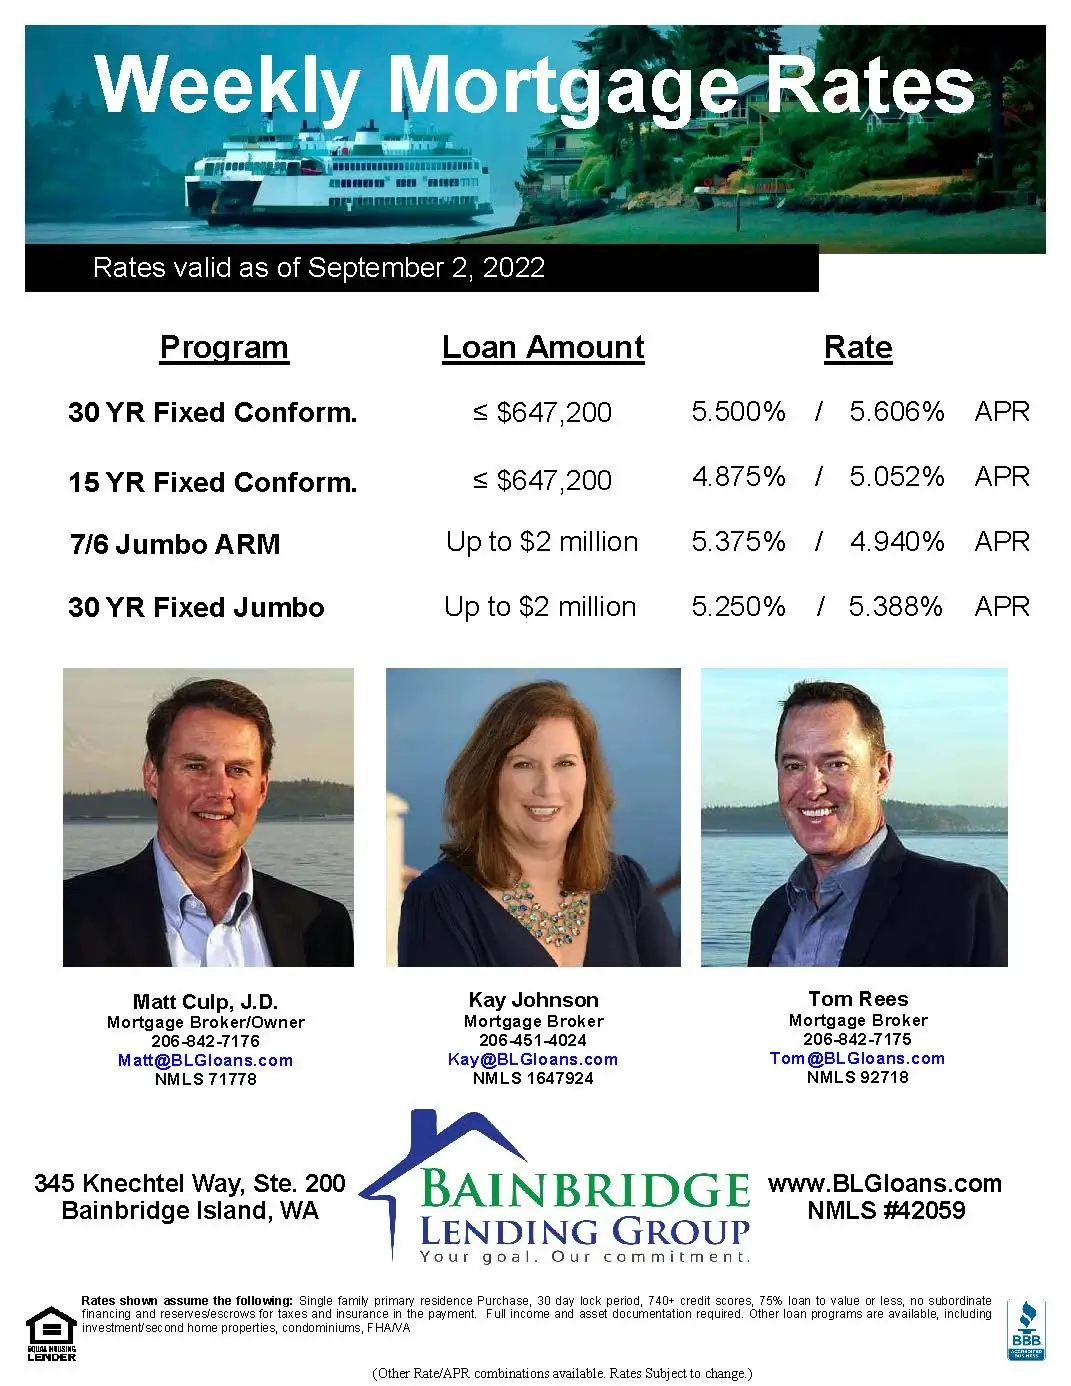 Weekly Rate Update for September 2, 2022